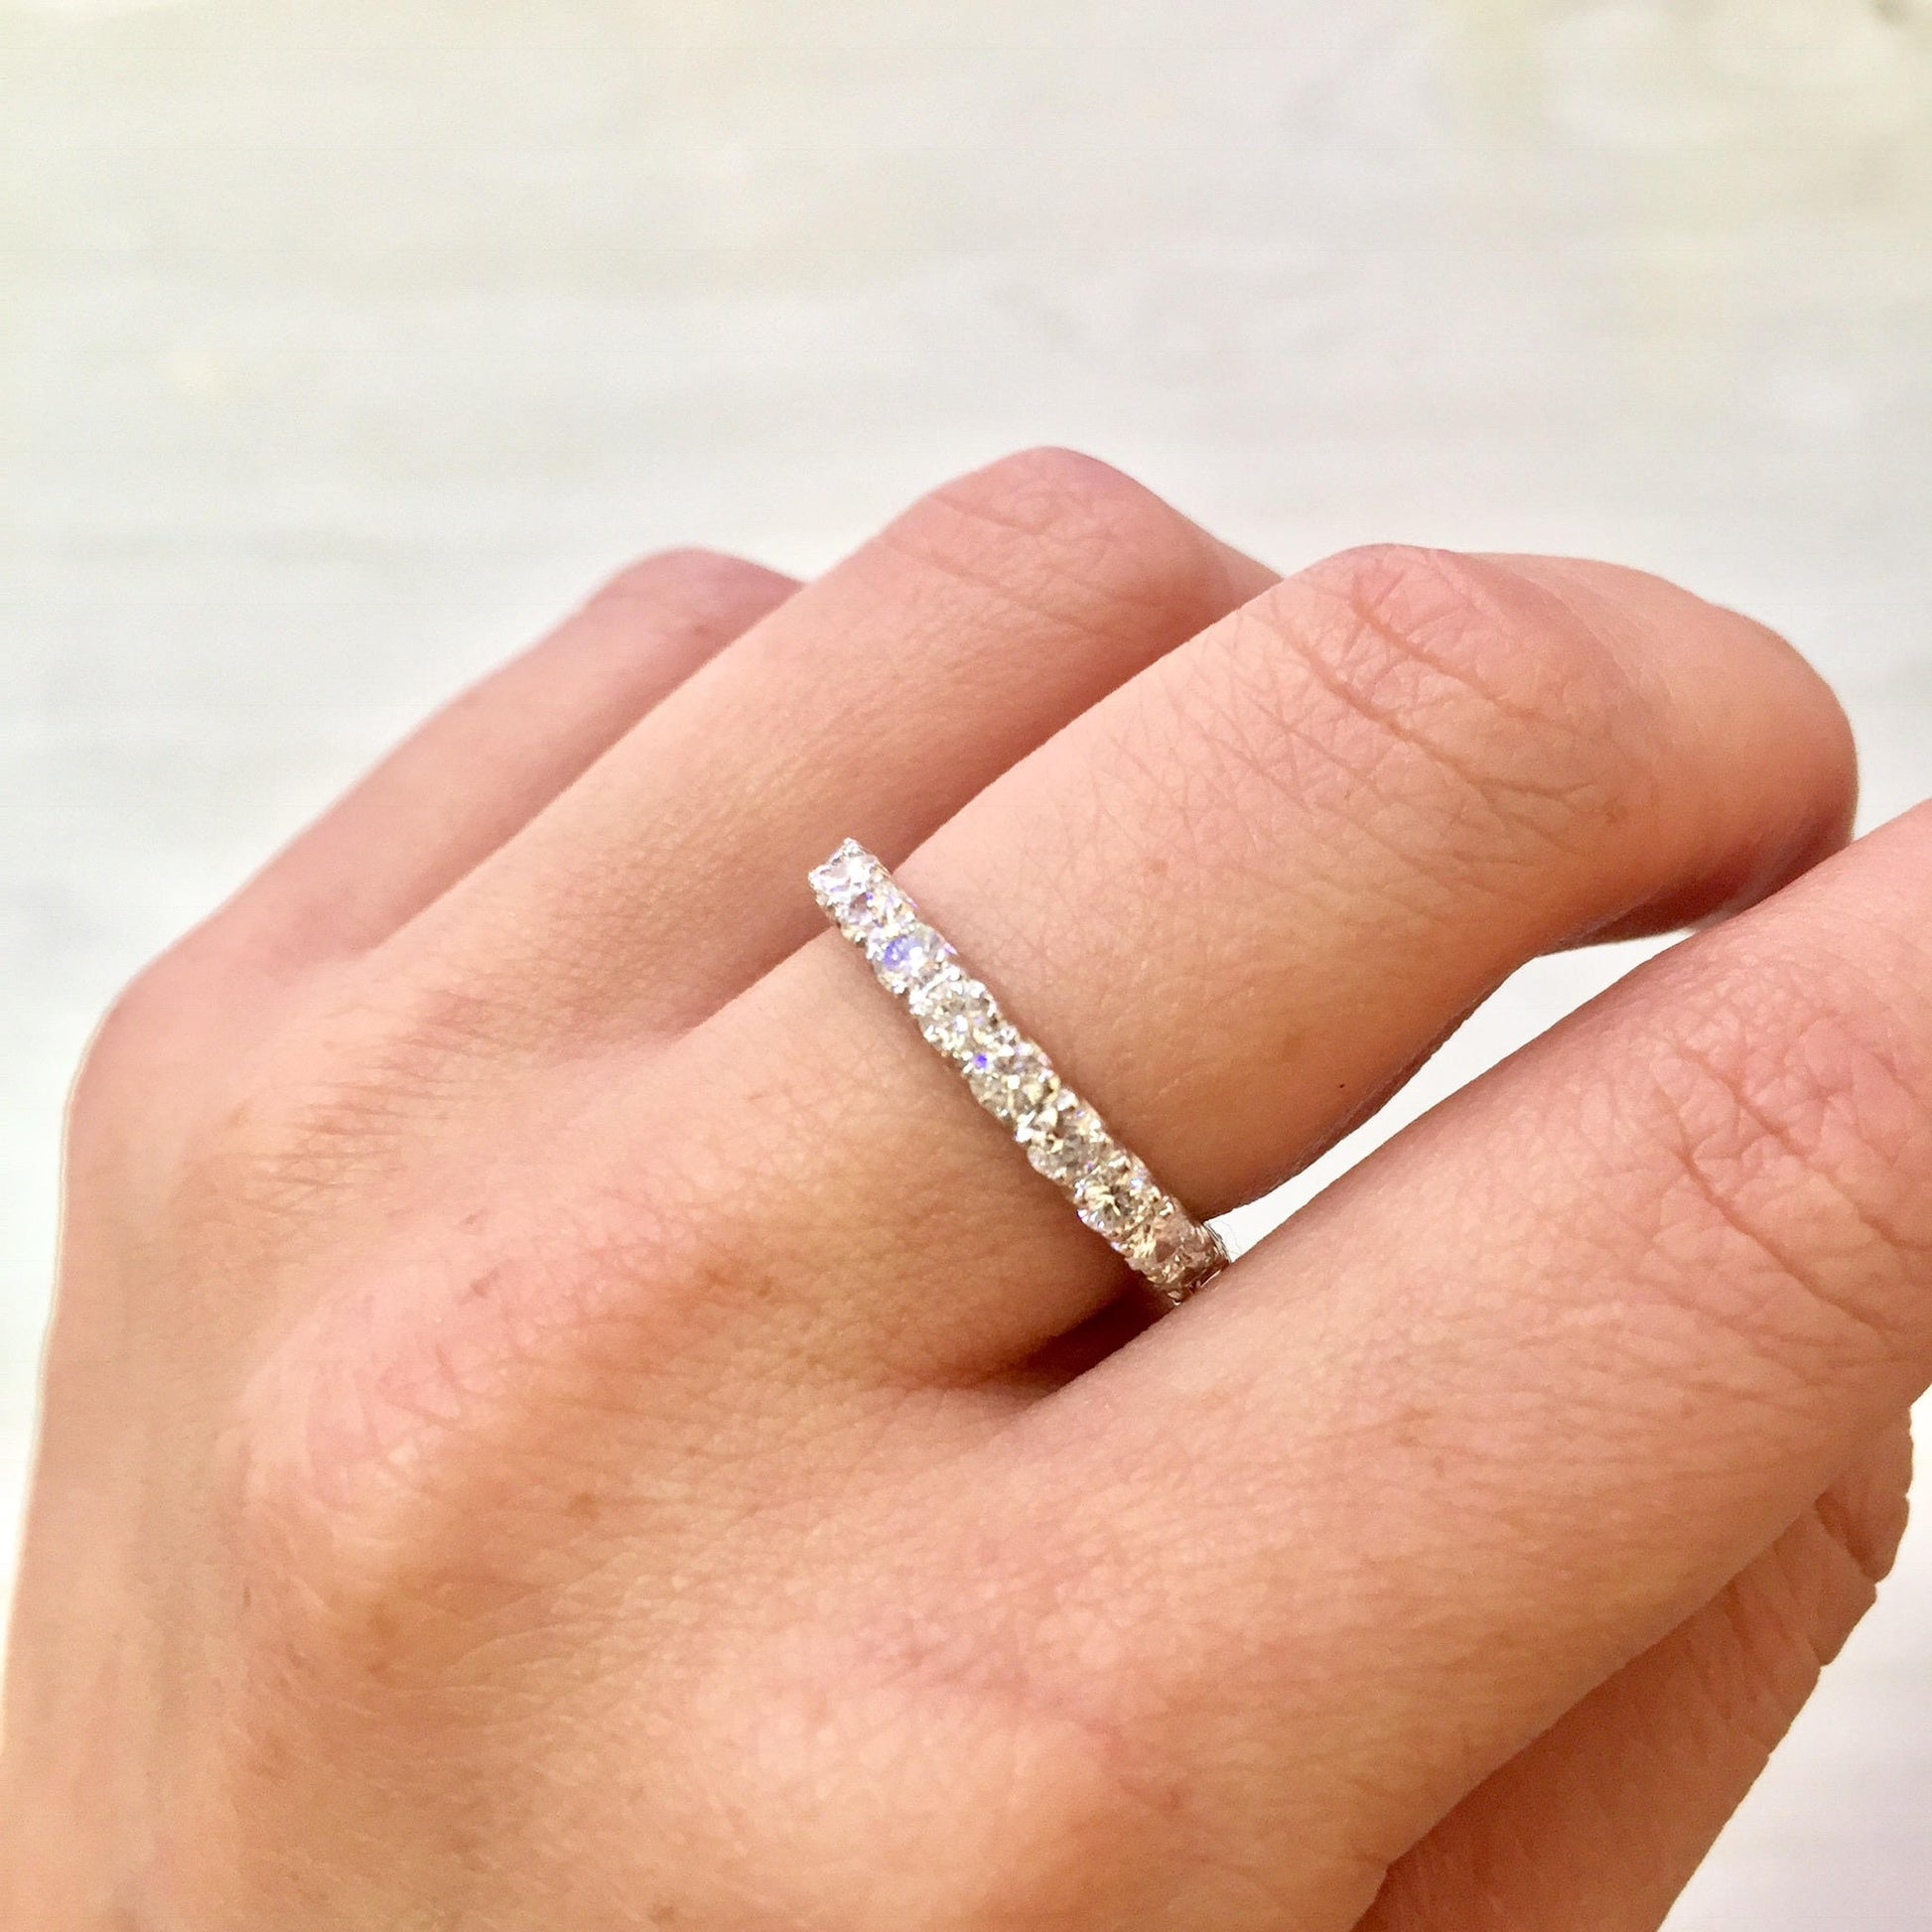 14 karat white gold and diamond wedding band on a finger, showcasing an eternity ring design with small round diamonds encircling the entire band.